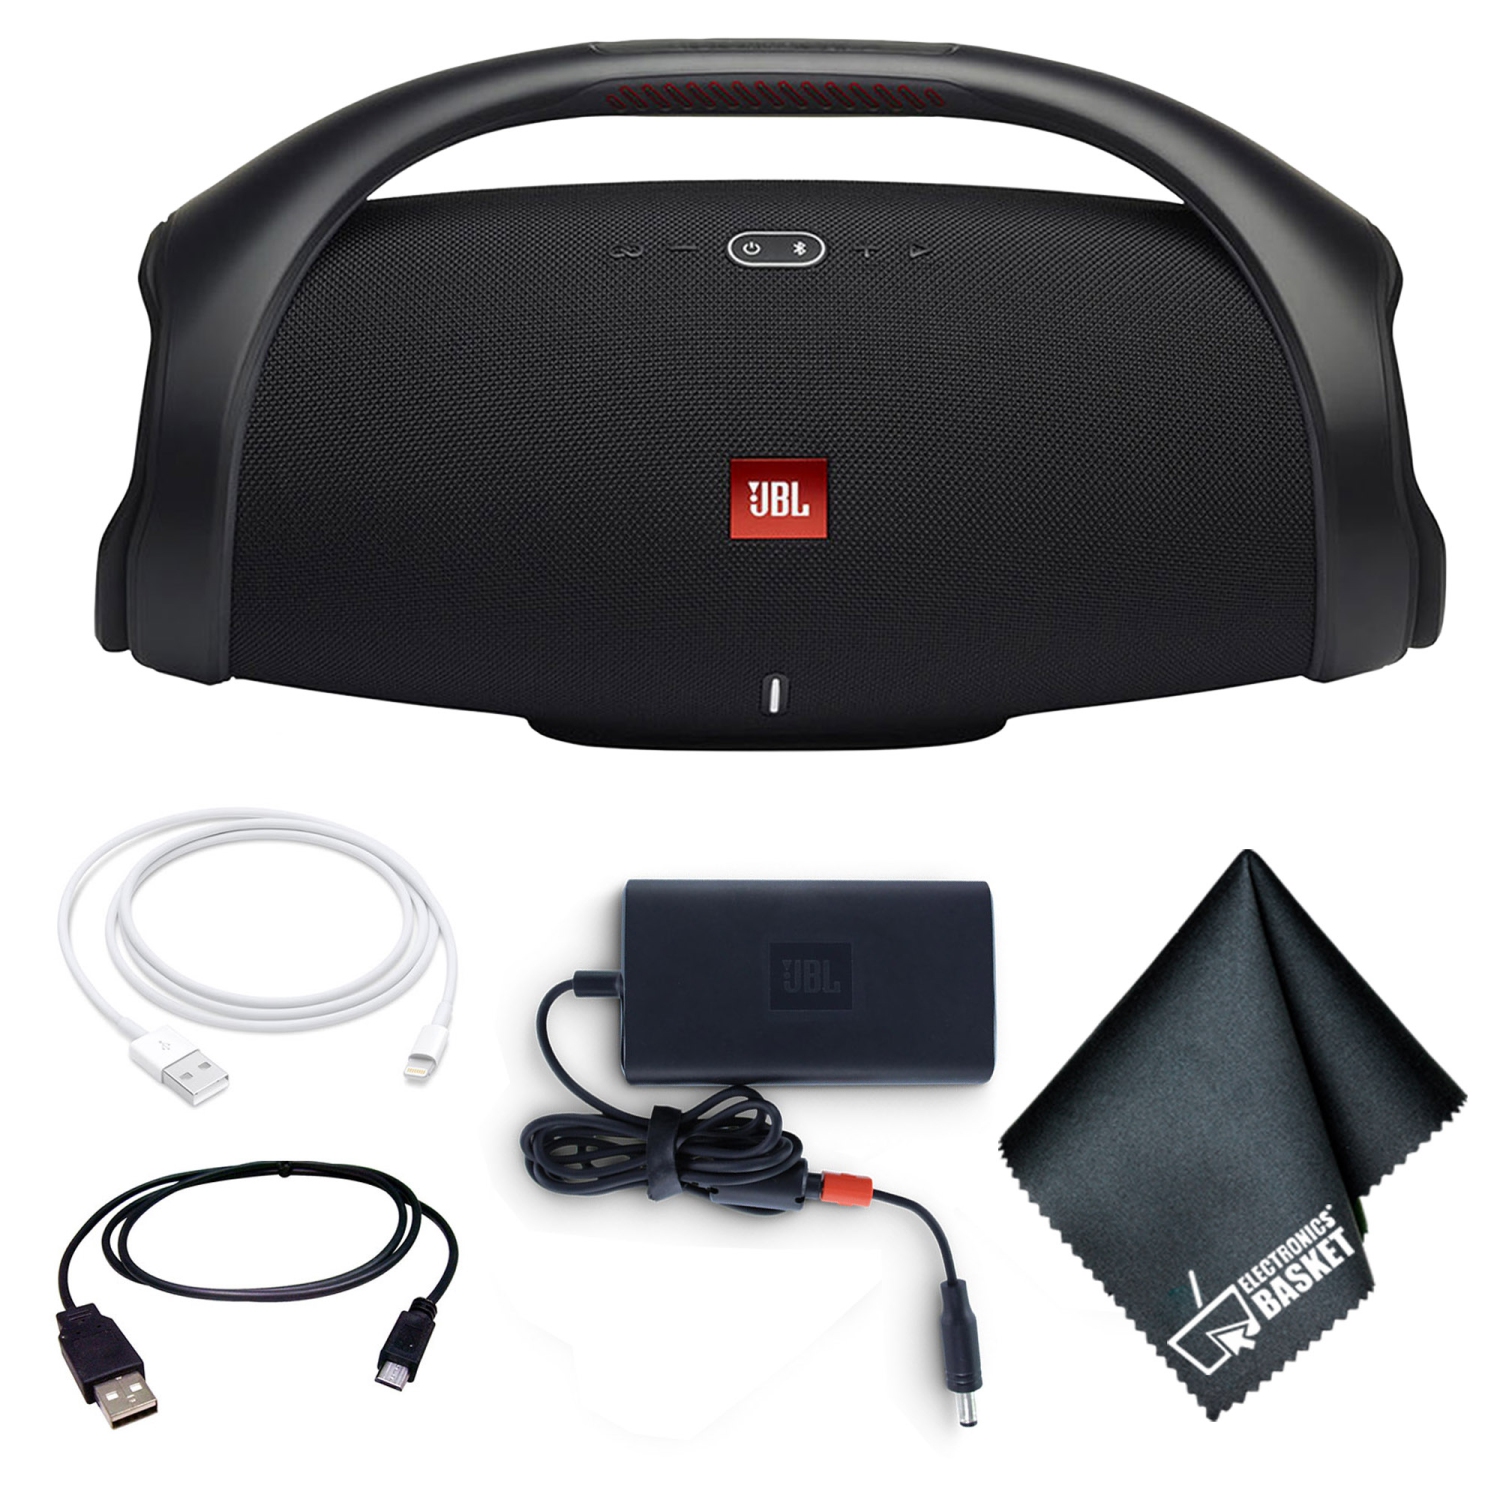 JBL Boombox 2 Portable Bluetooth Speaker (Black) with Charging Cables